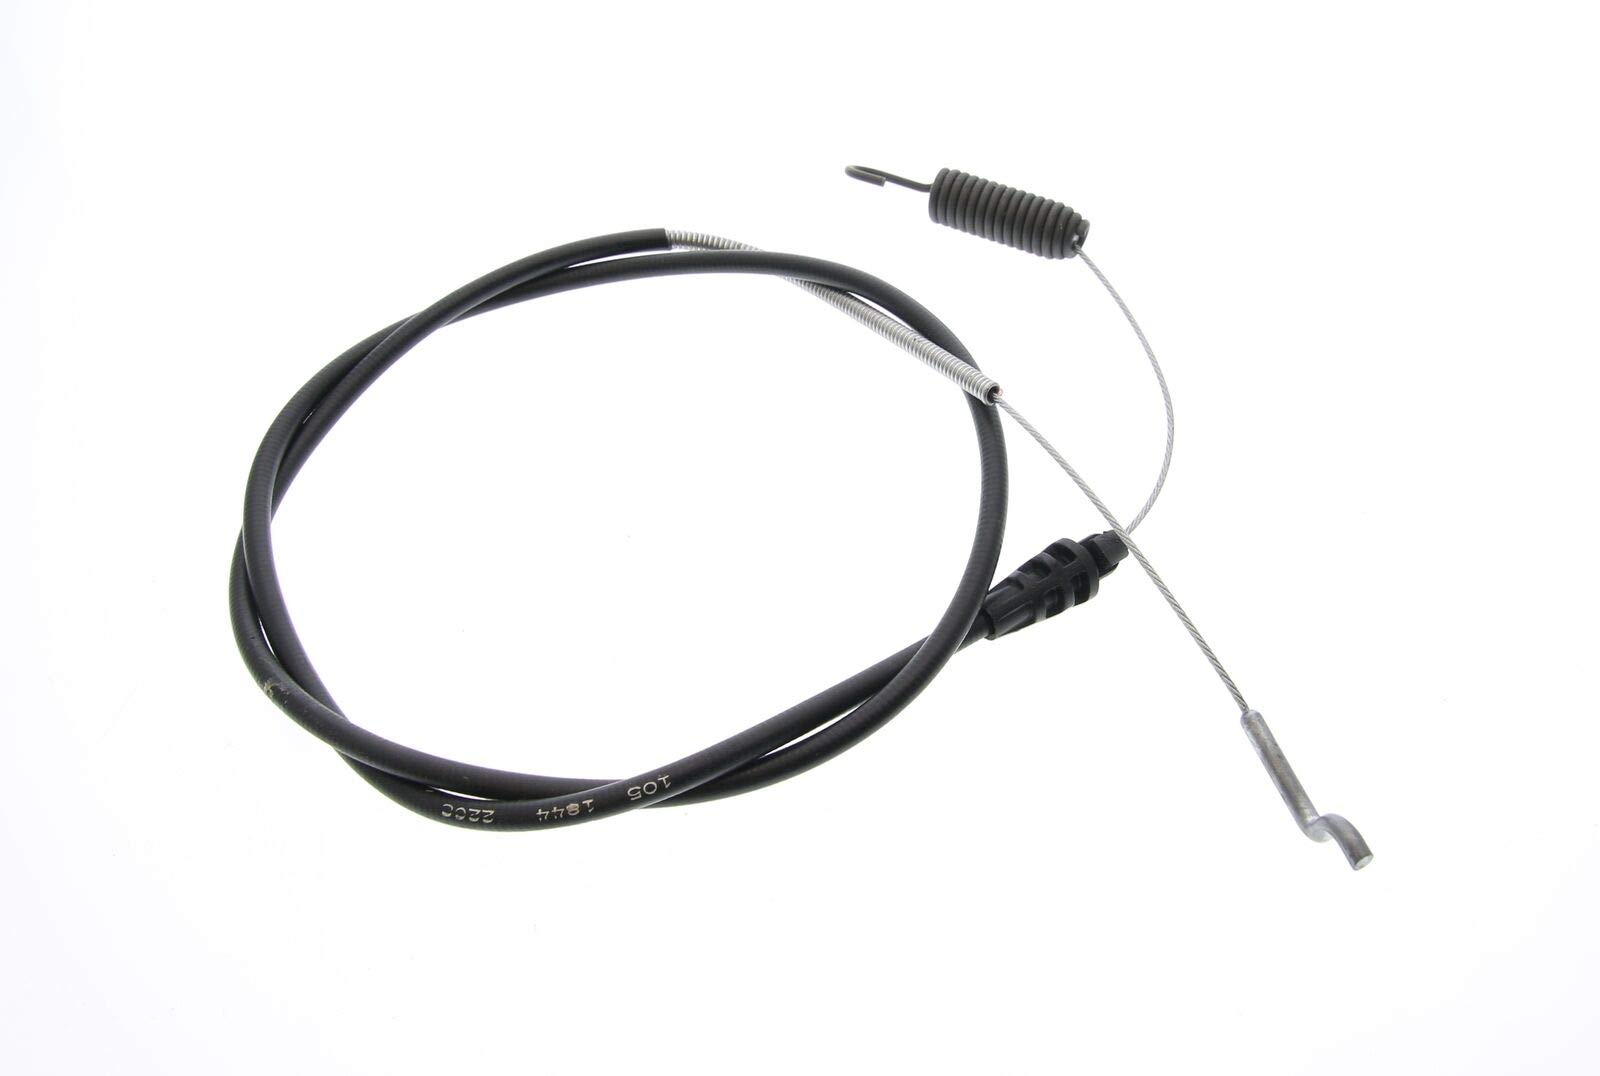 jiangxiu 105-1844 Replacement Traction Control Cable for Toro Rear Drive Propelled Lawn Mower 105-1844